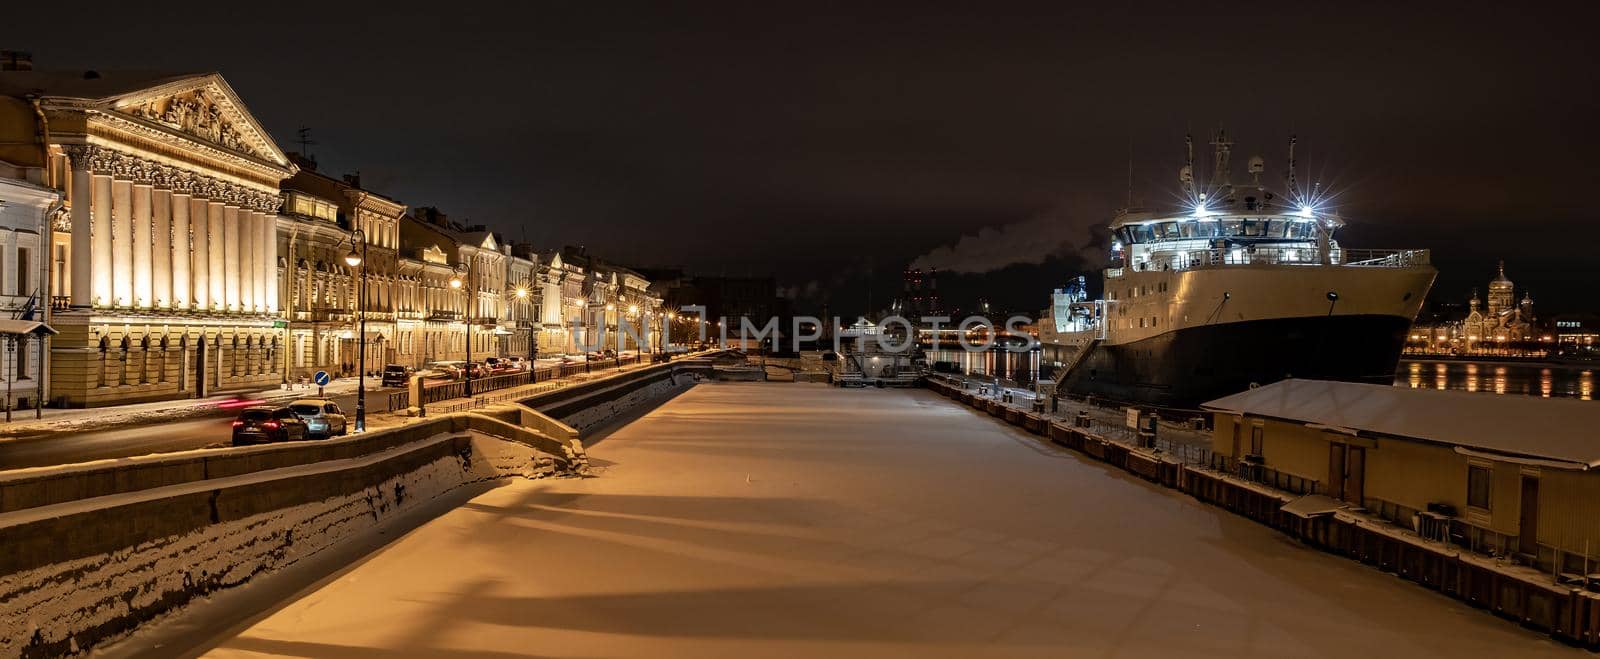 The panoramic footage of the winter night city Saint-Petersburg with picturesque reflection on water, big ship moored near Blagoveshchensky bridge, English embankment, cathedral on background. High quality photo